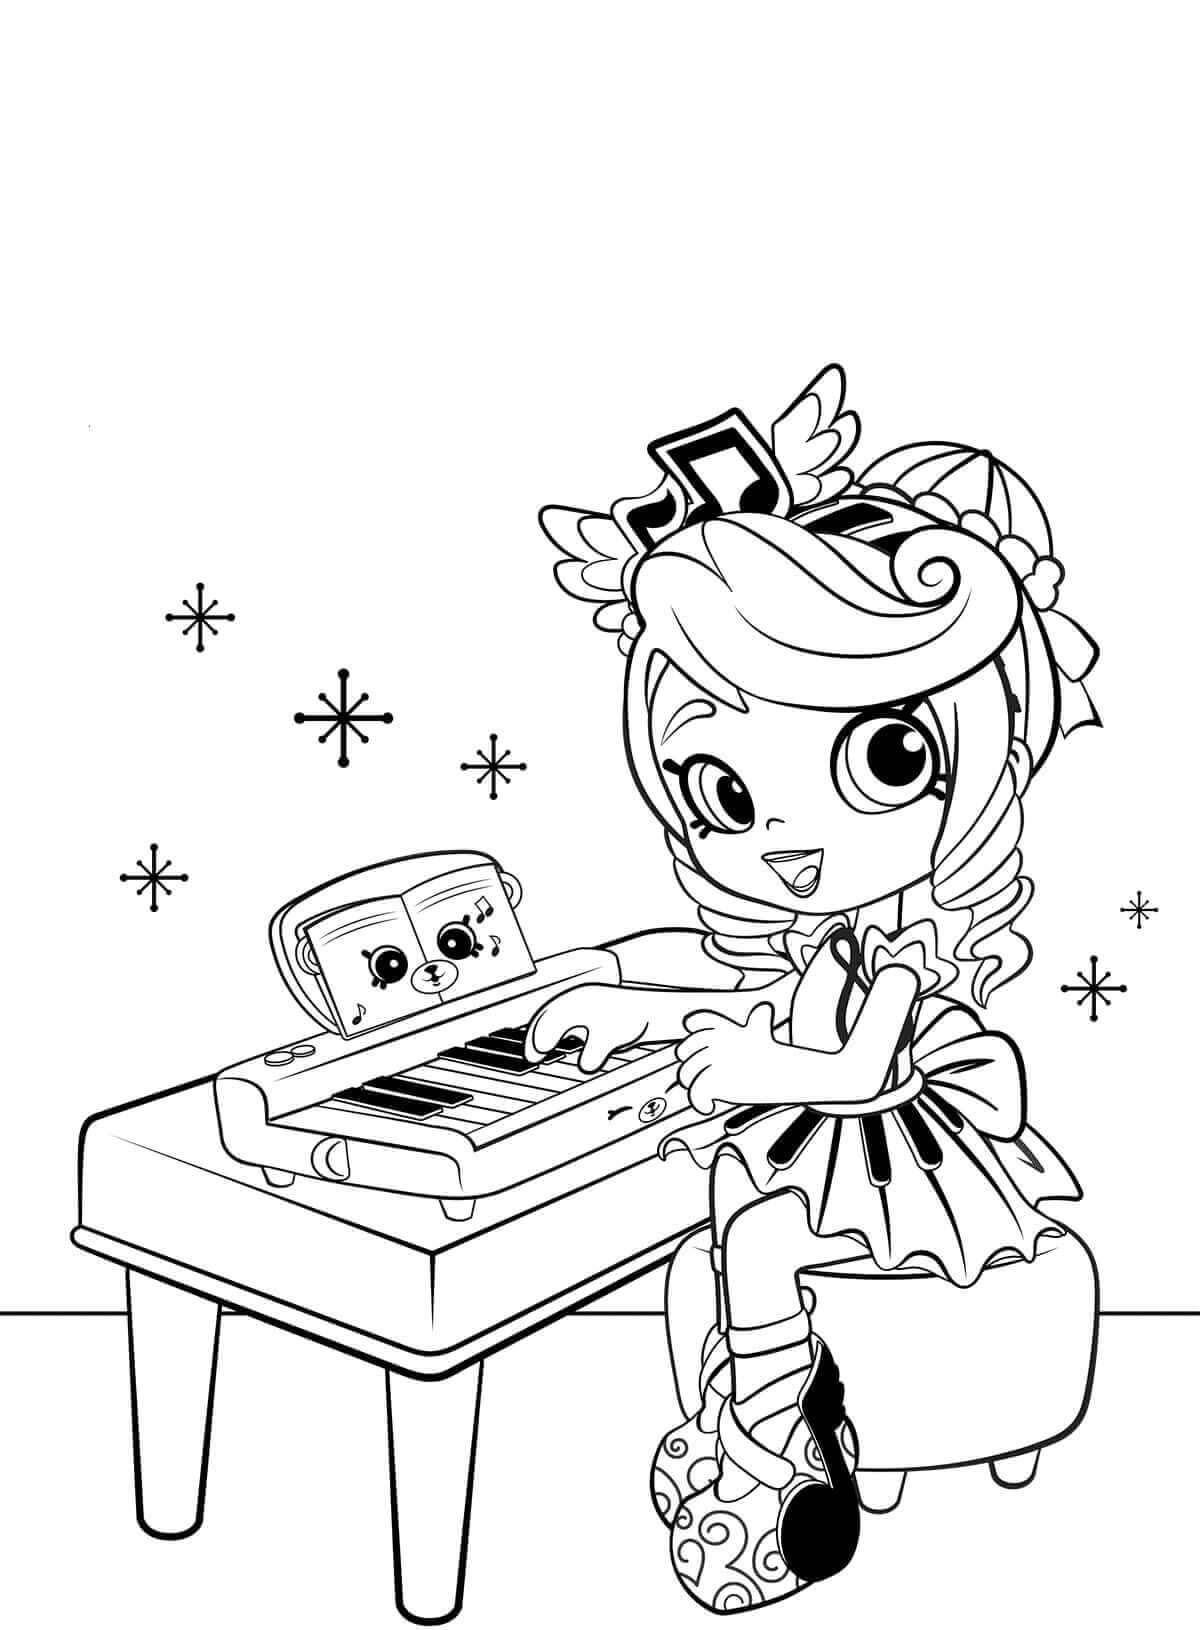 Peppa Mint Joue du Piano coloring page